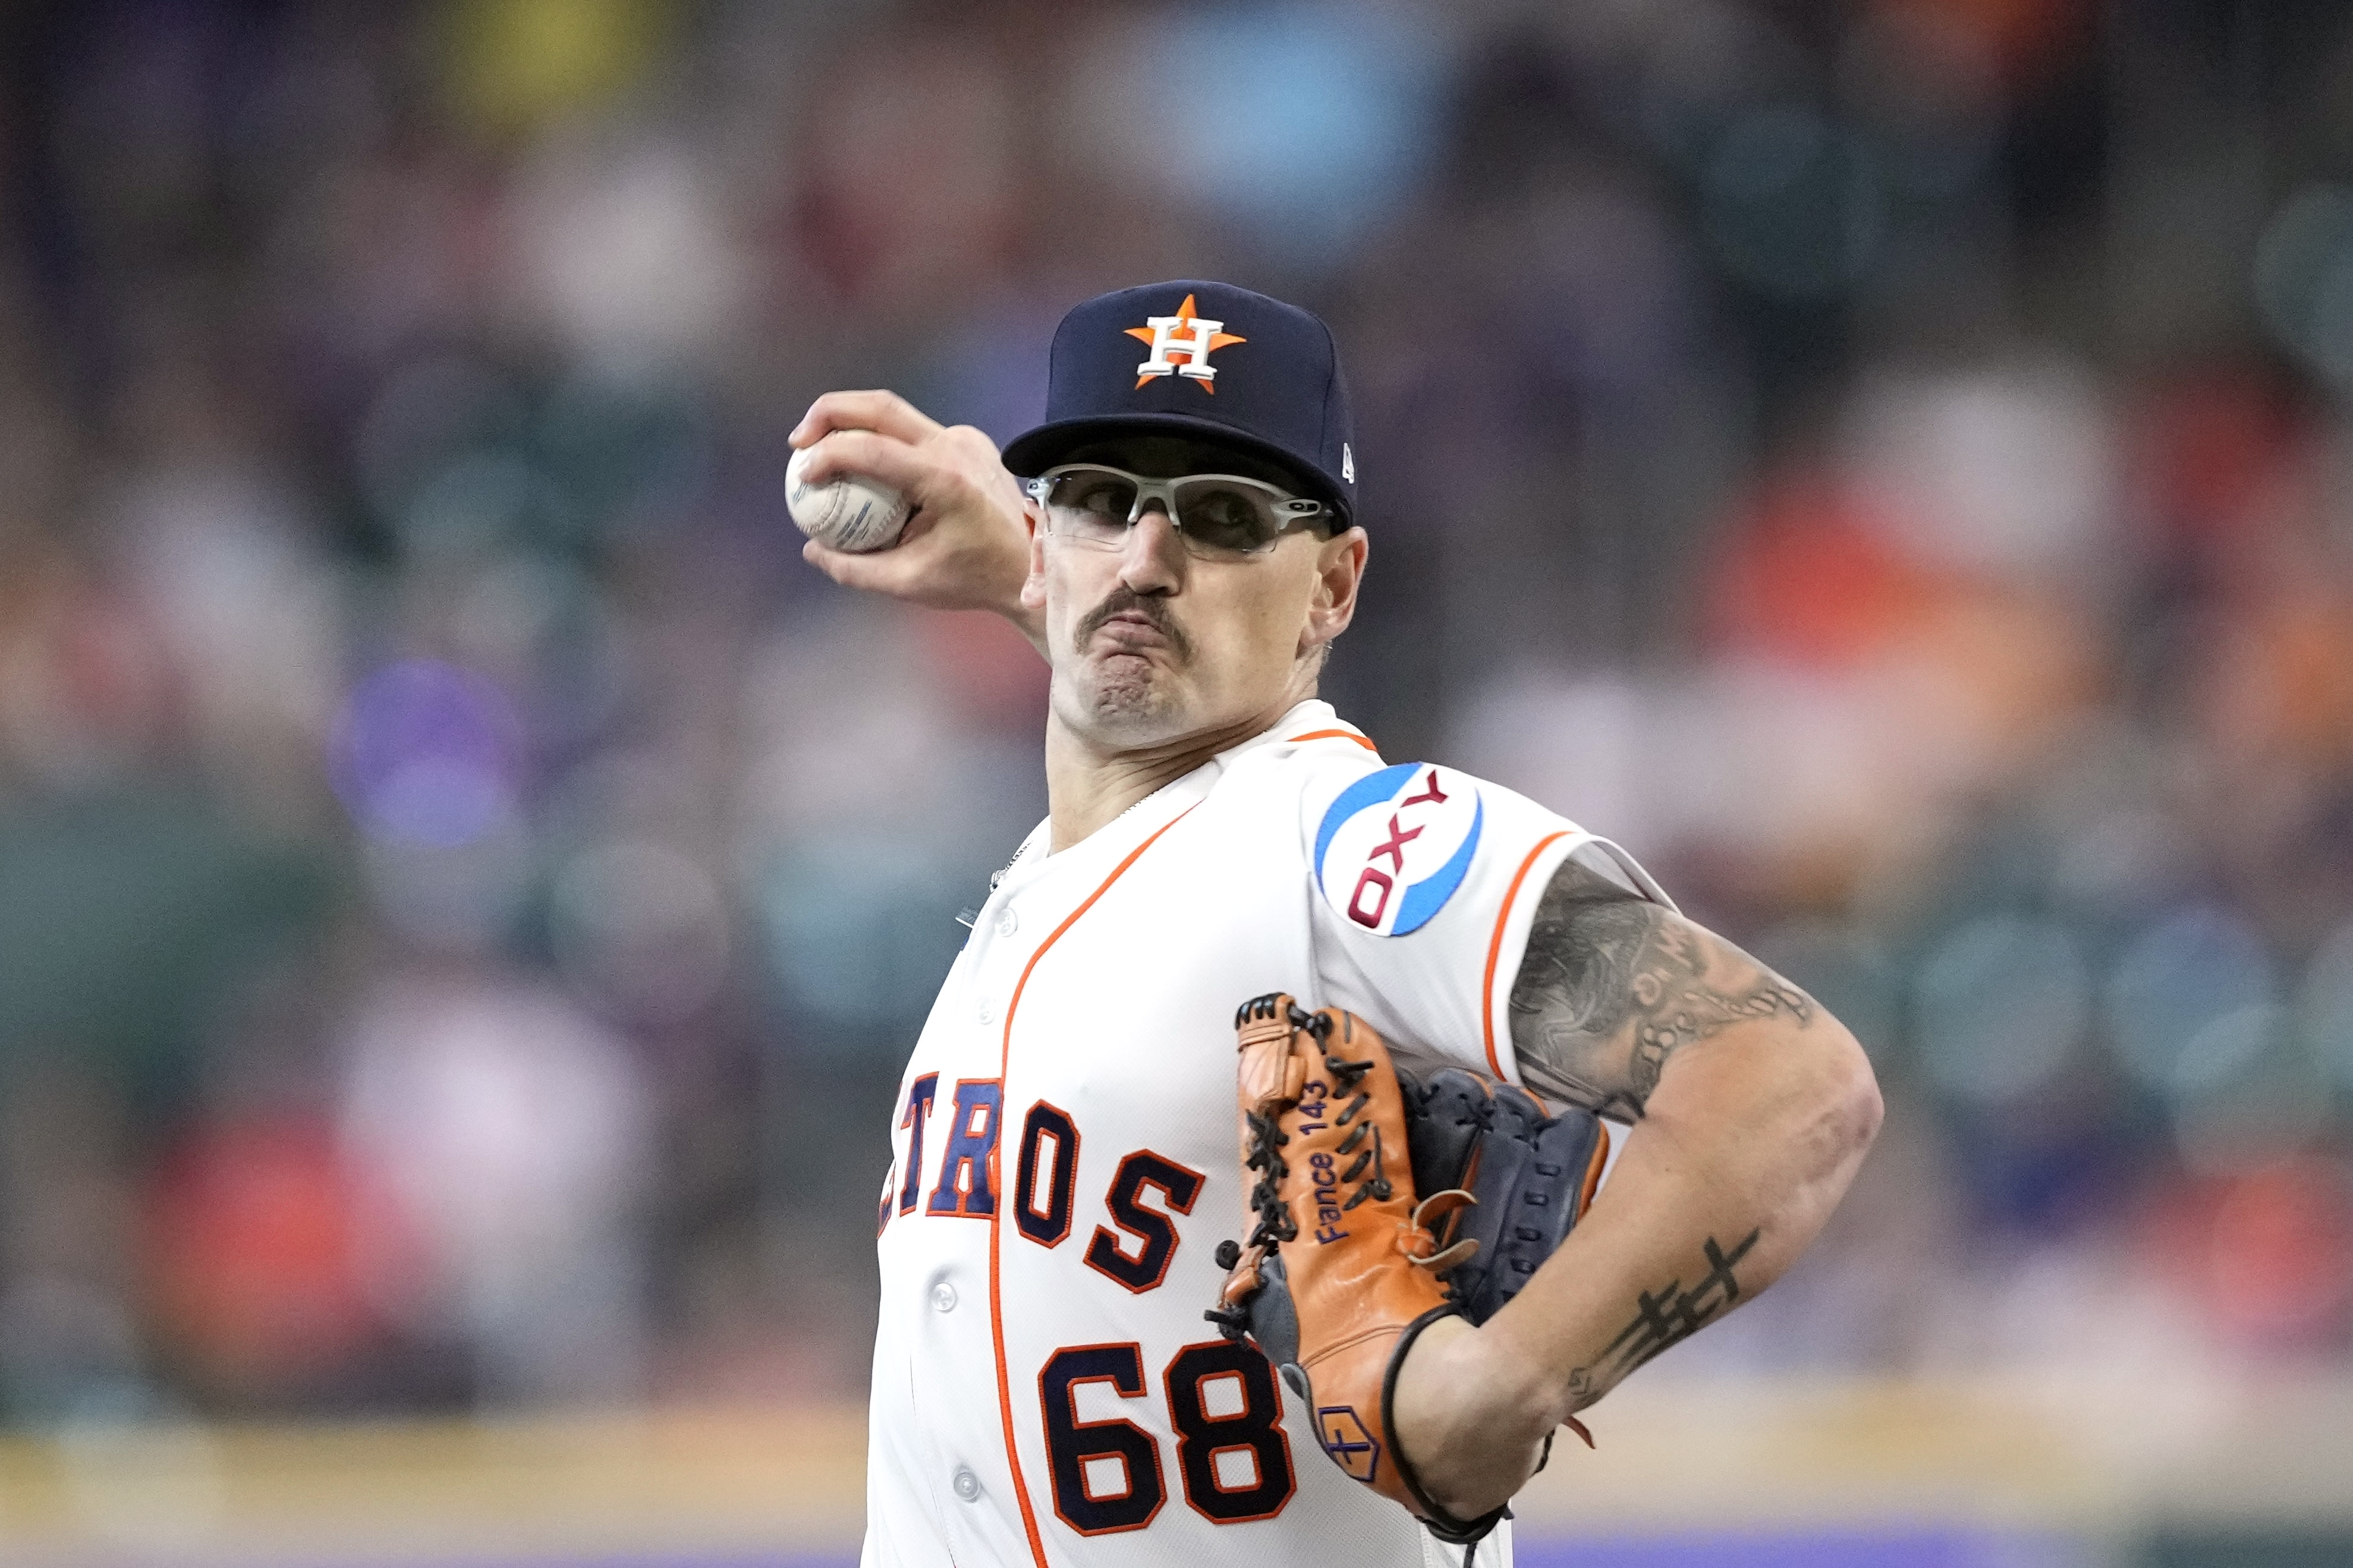 Houston Astros remain banged up, but reinforcements are on the way